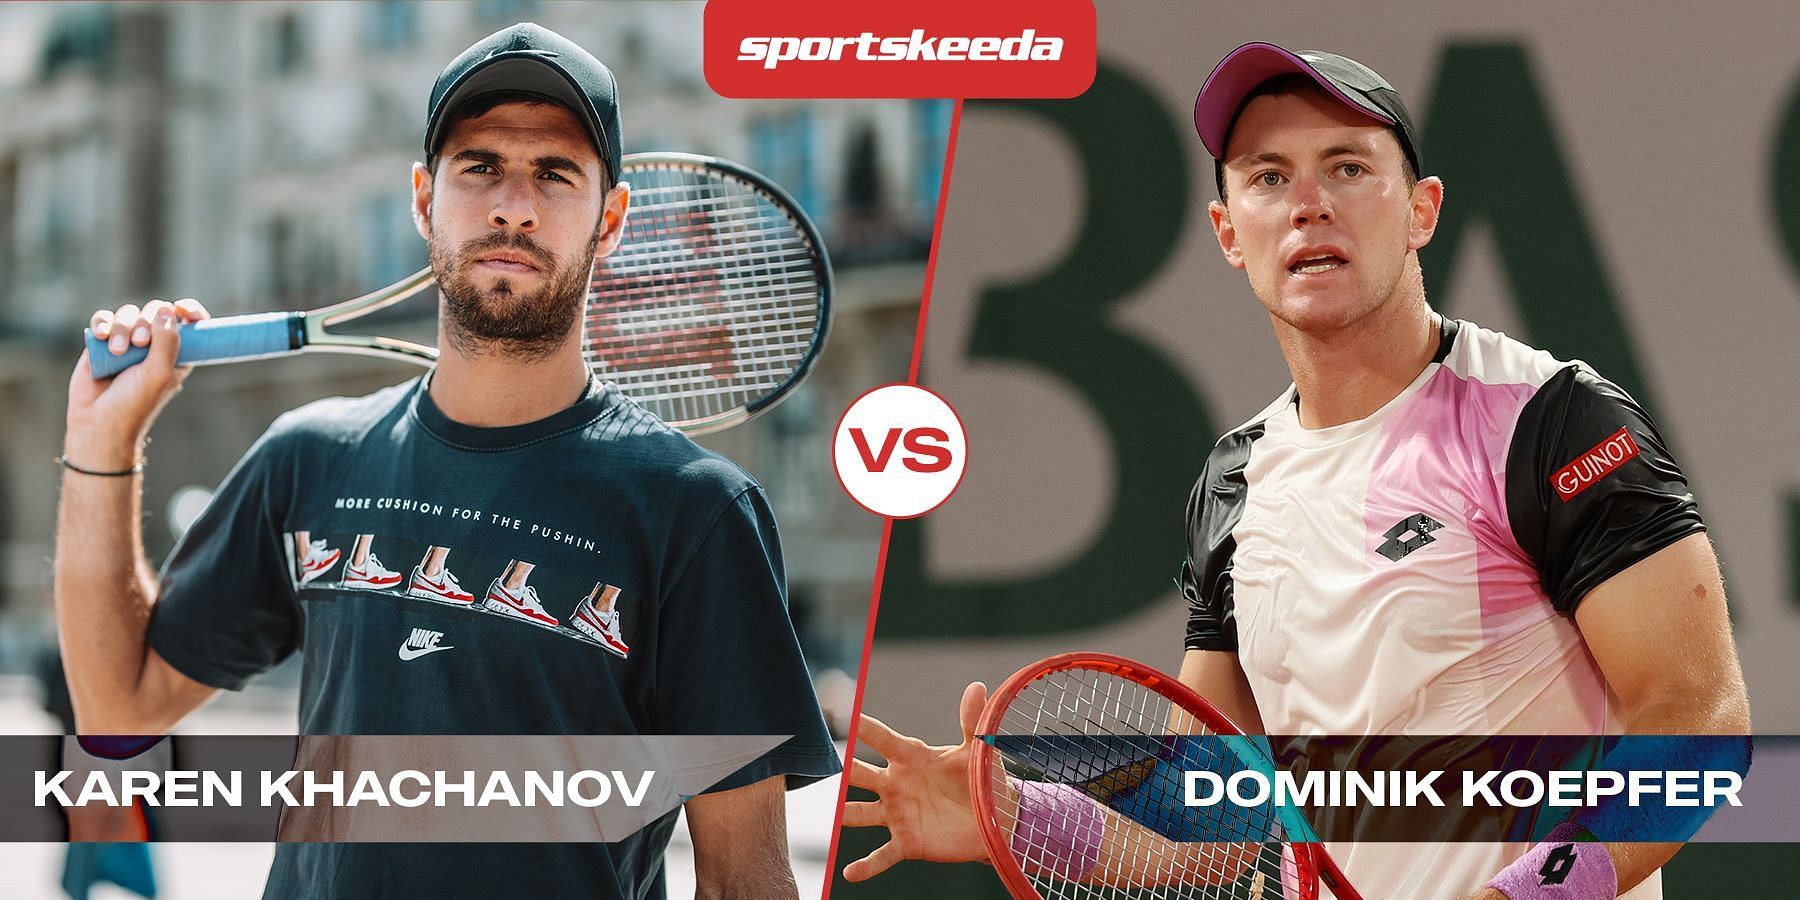 Khachanov and Koepfer will go head-to-head in the second round of the Citi Open on Tuesday